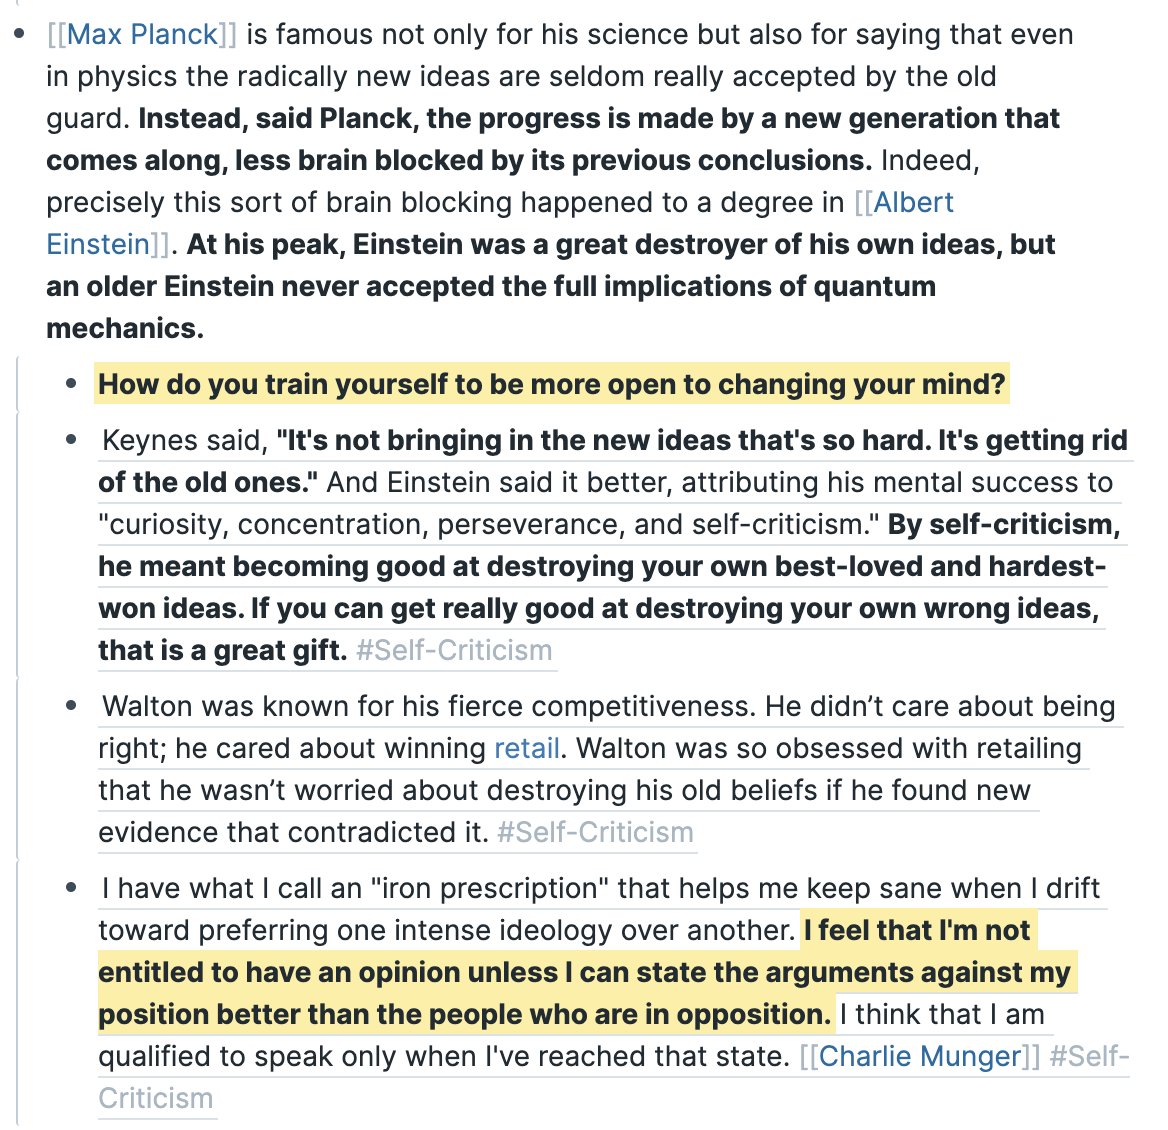 40/ "Self-Criticism" may be one of the most important ideas I've taken away from Charlie Munger. "I feel that I'm not entitled to have an opinion unless I can state the arguments against my position better than the people who are in opposition."